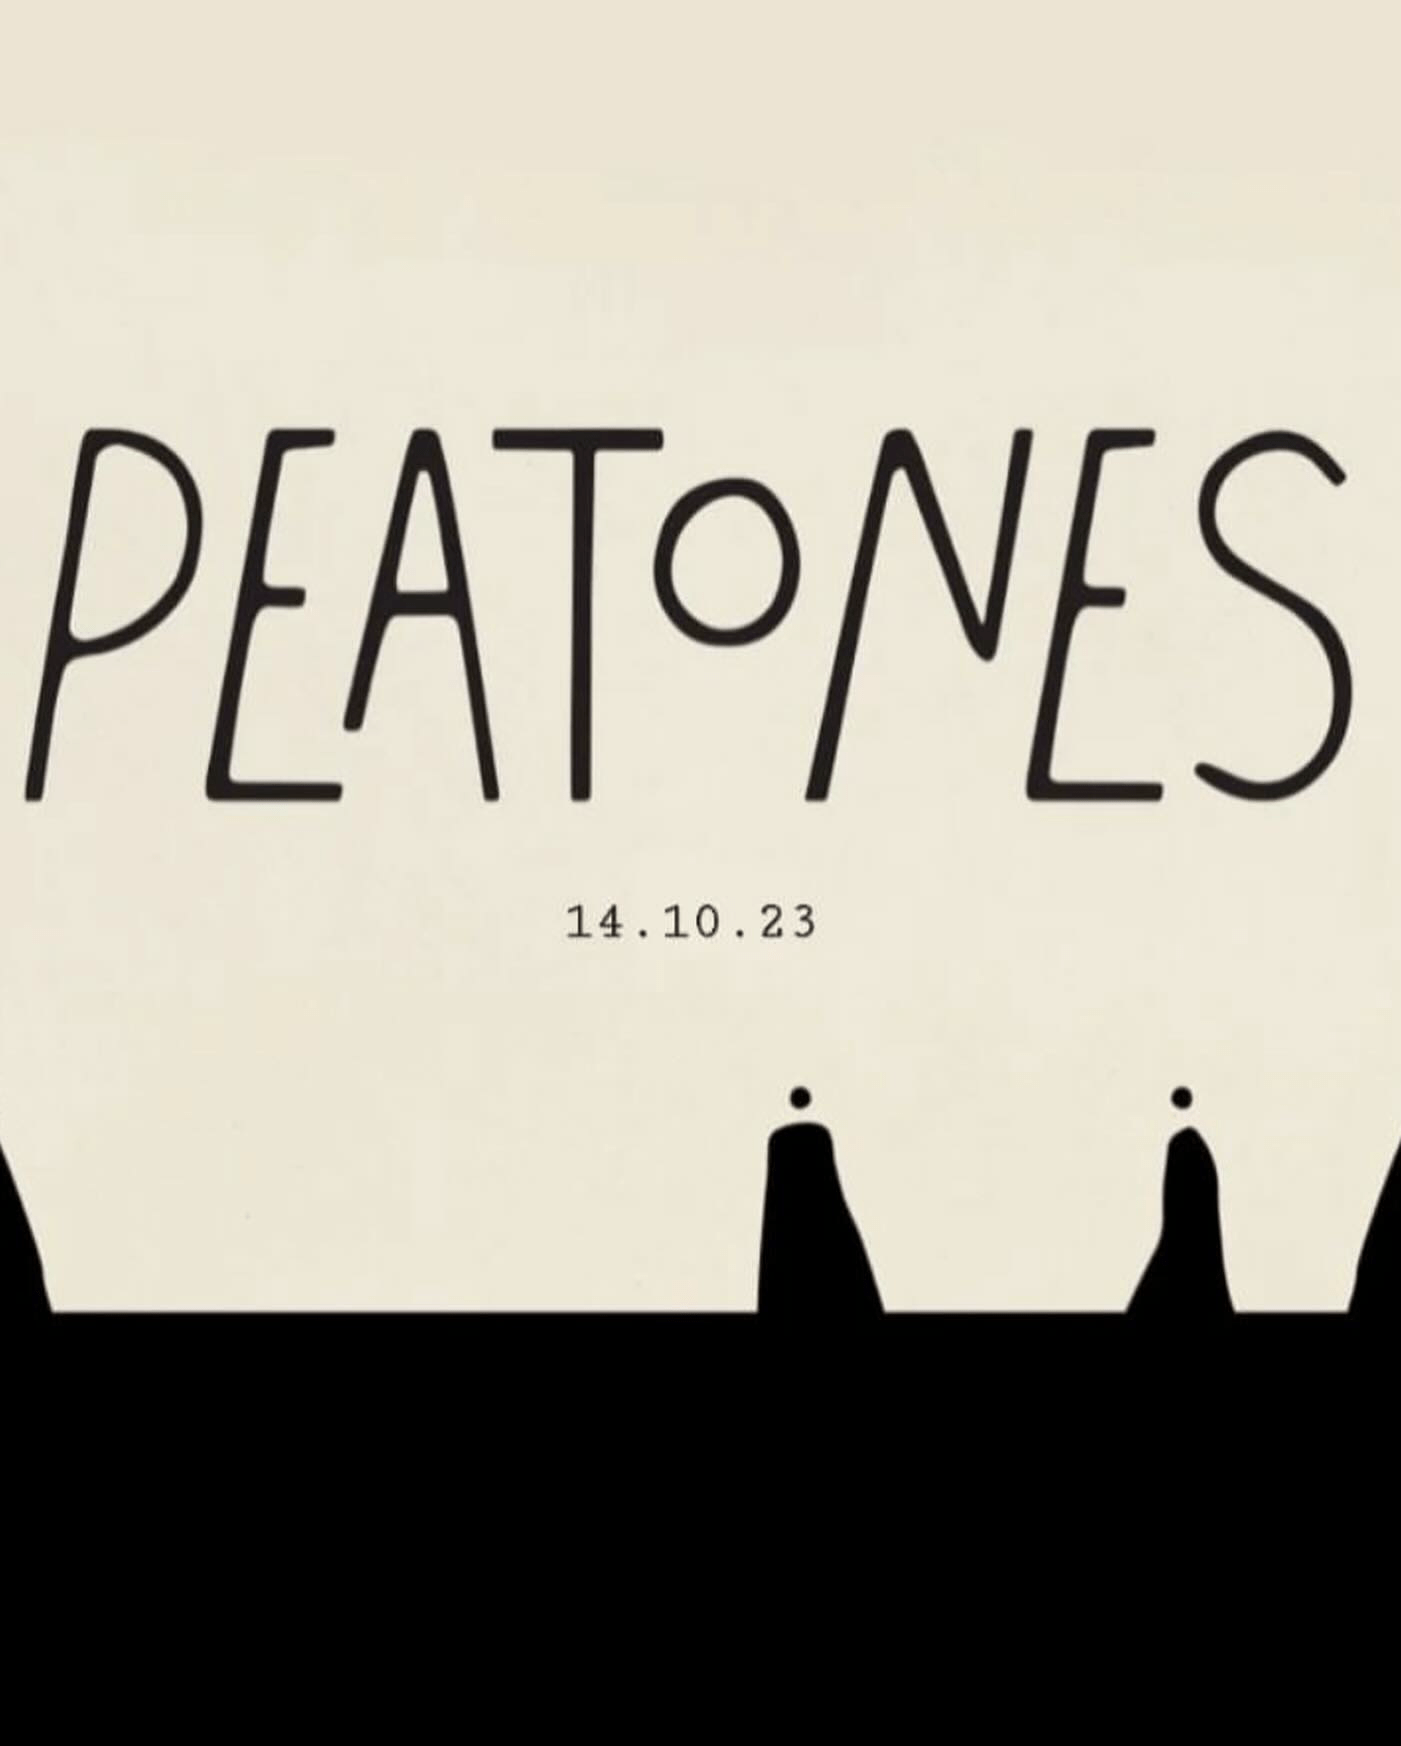 Logo for Peatones on a light background